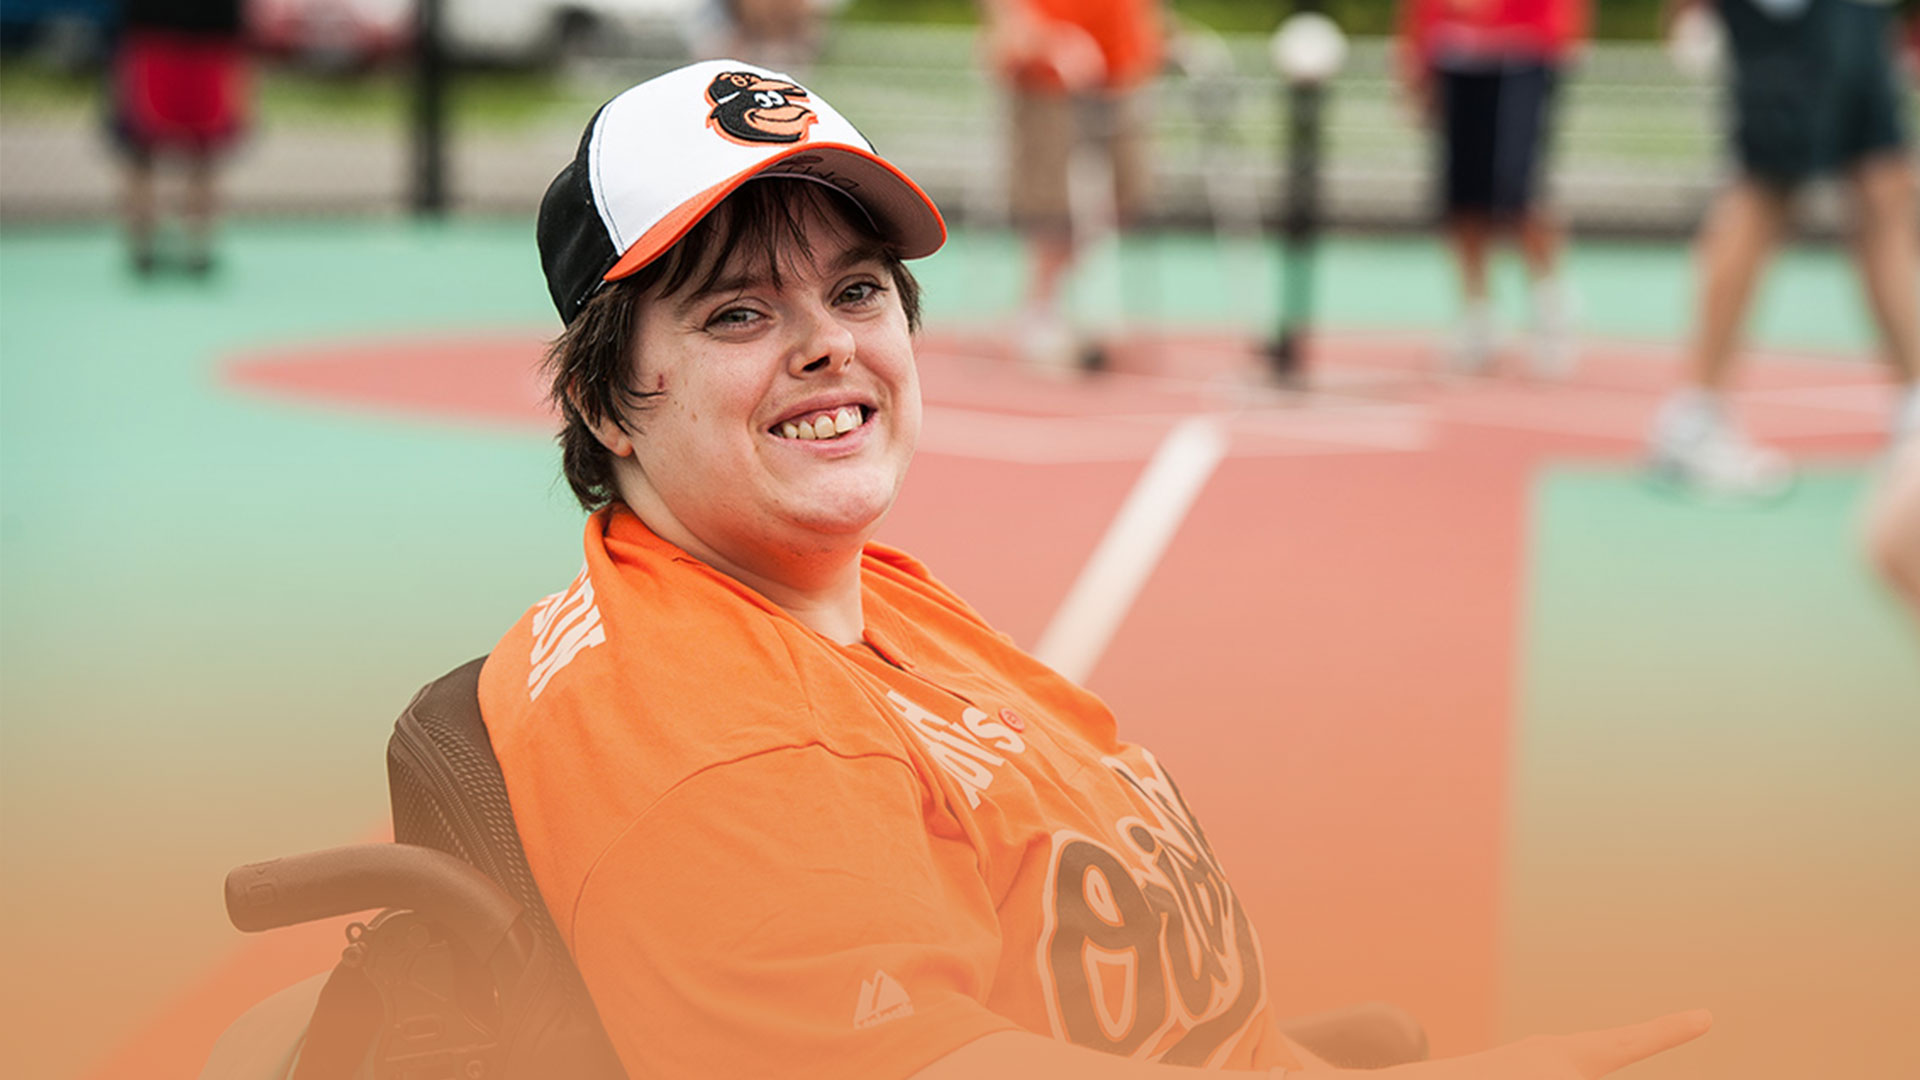 Miracle League Baseball Player on Field